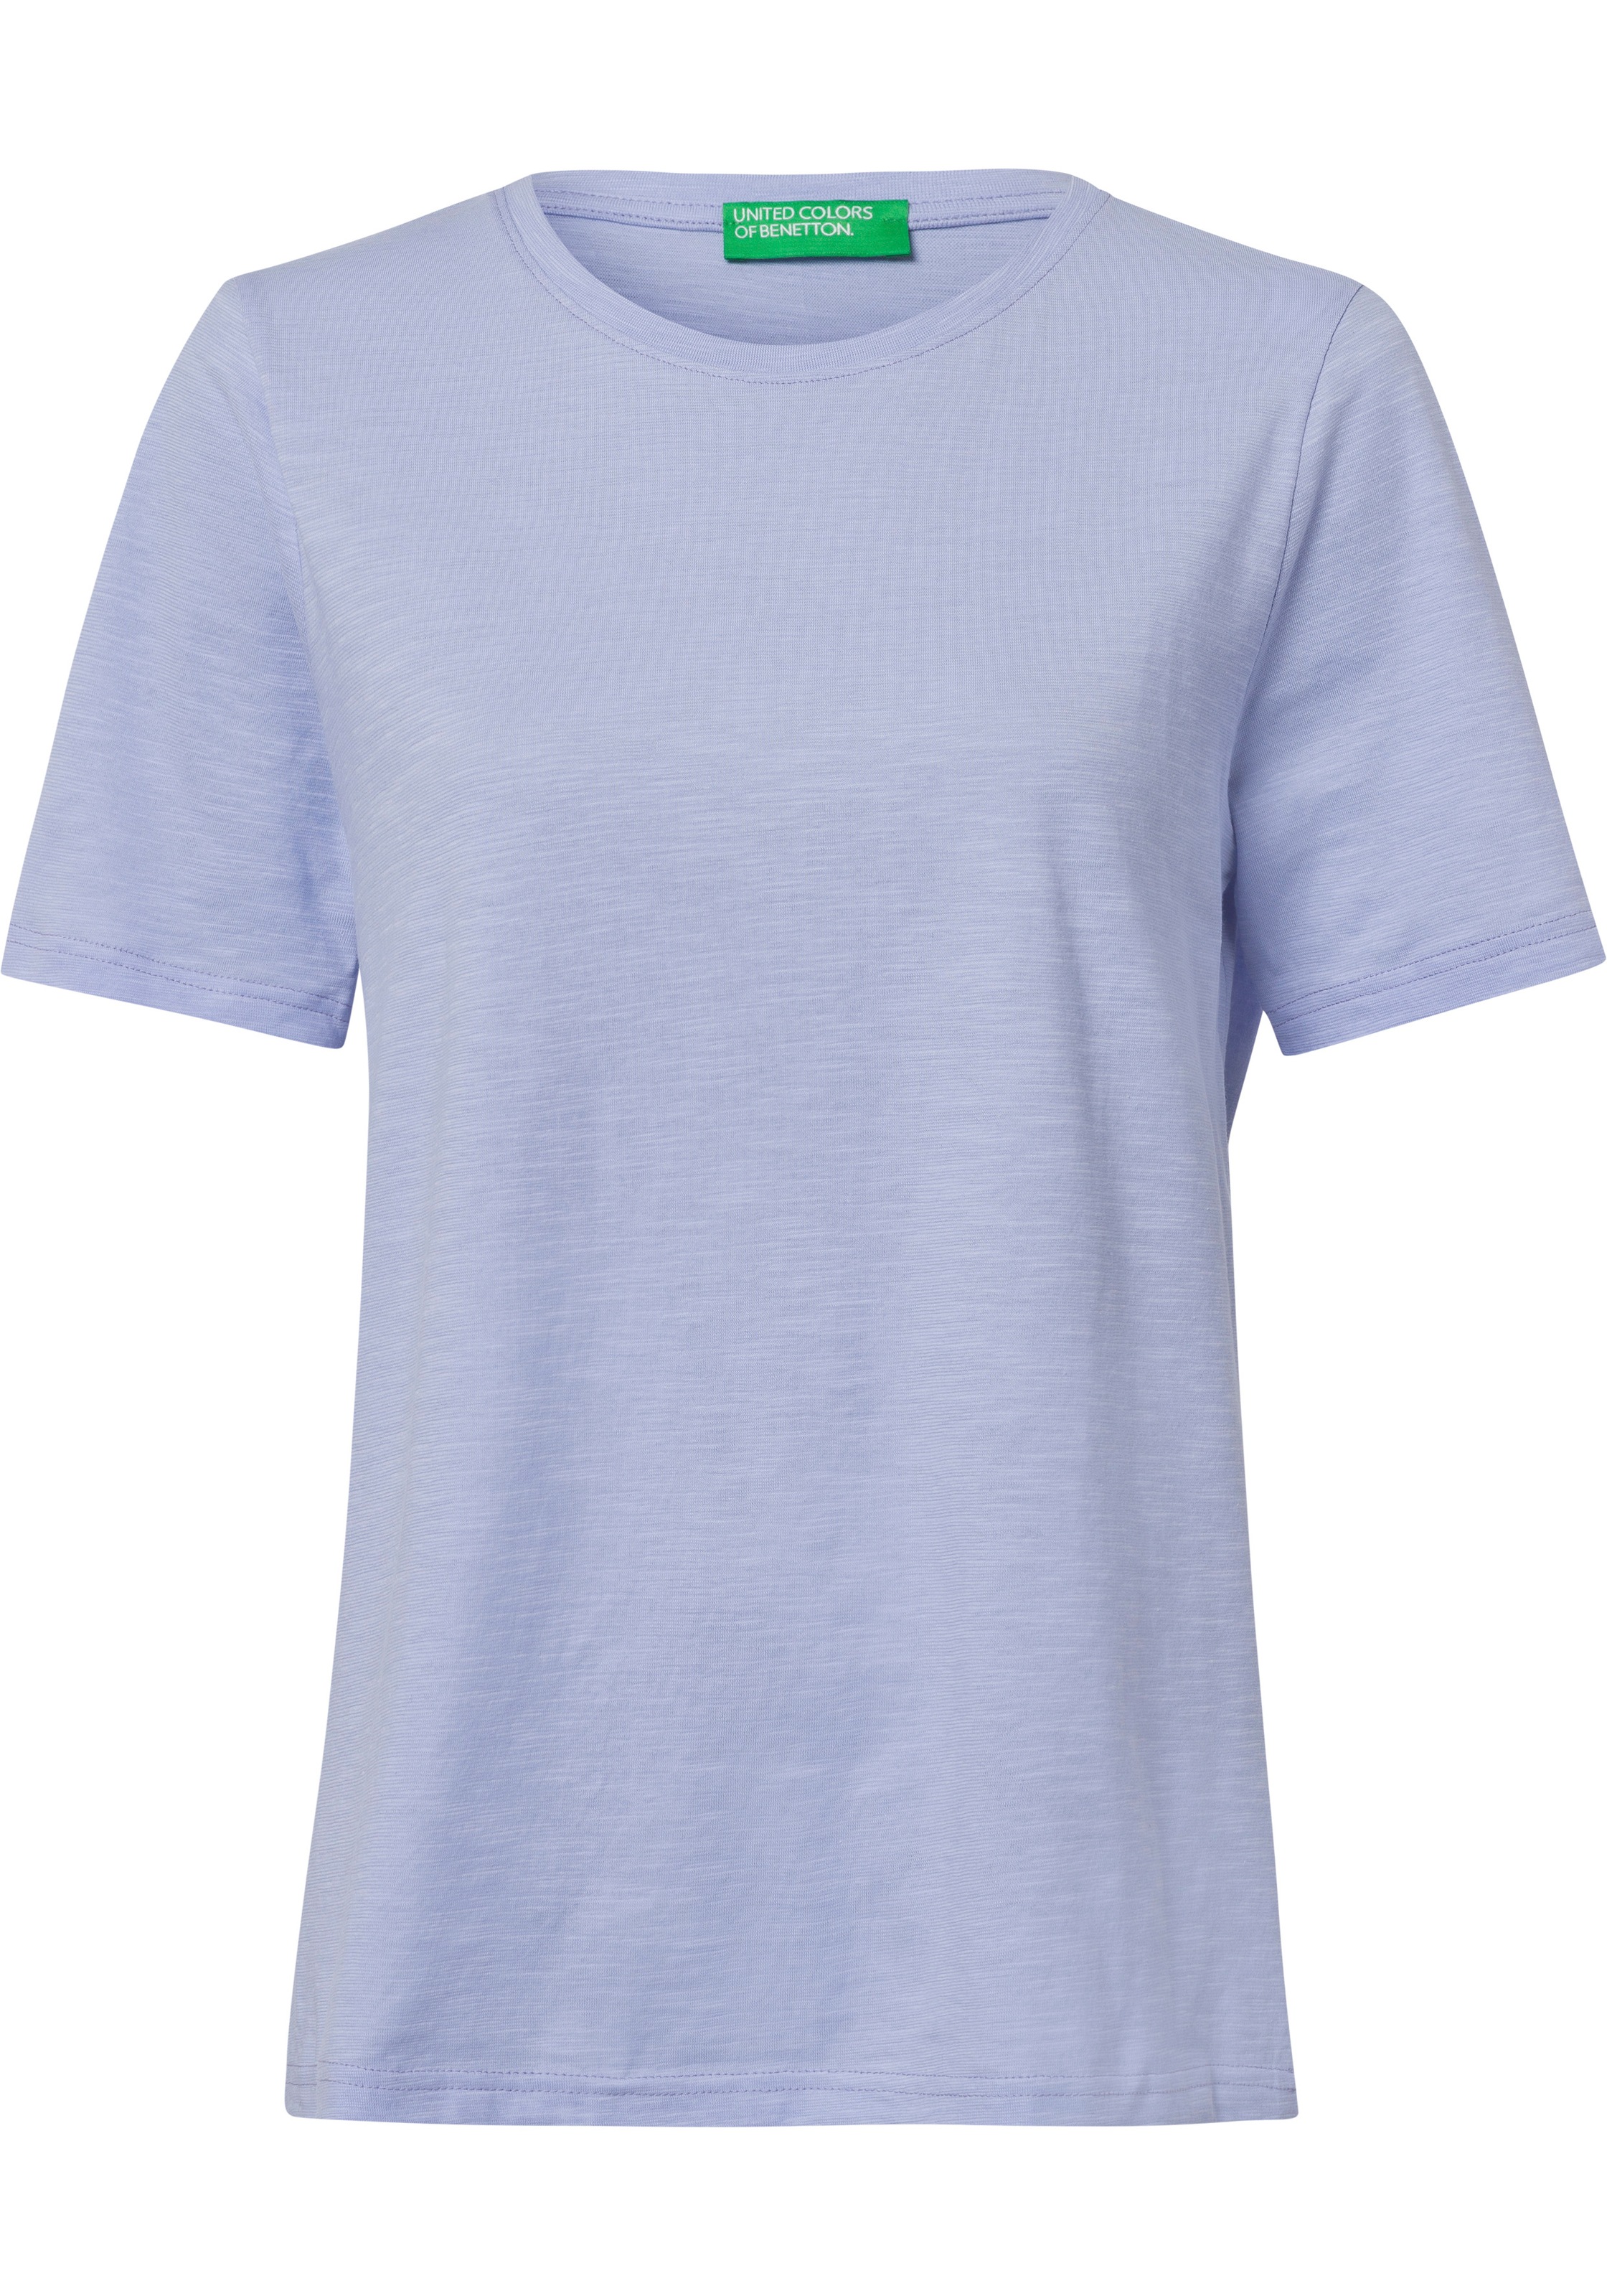 T-Shirt, cleaner Benetton ♕ Basic-Optik United bei Colors in of